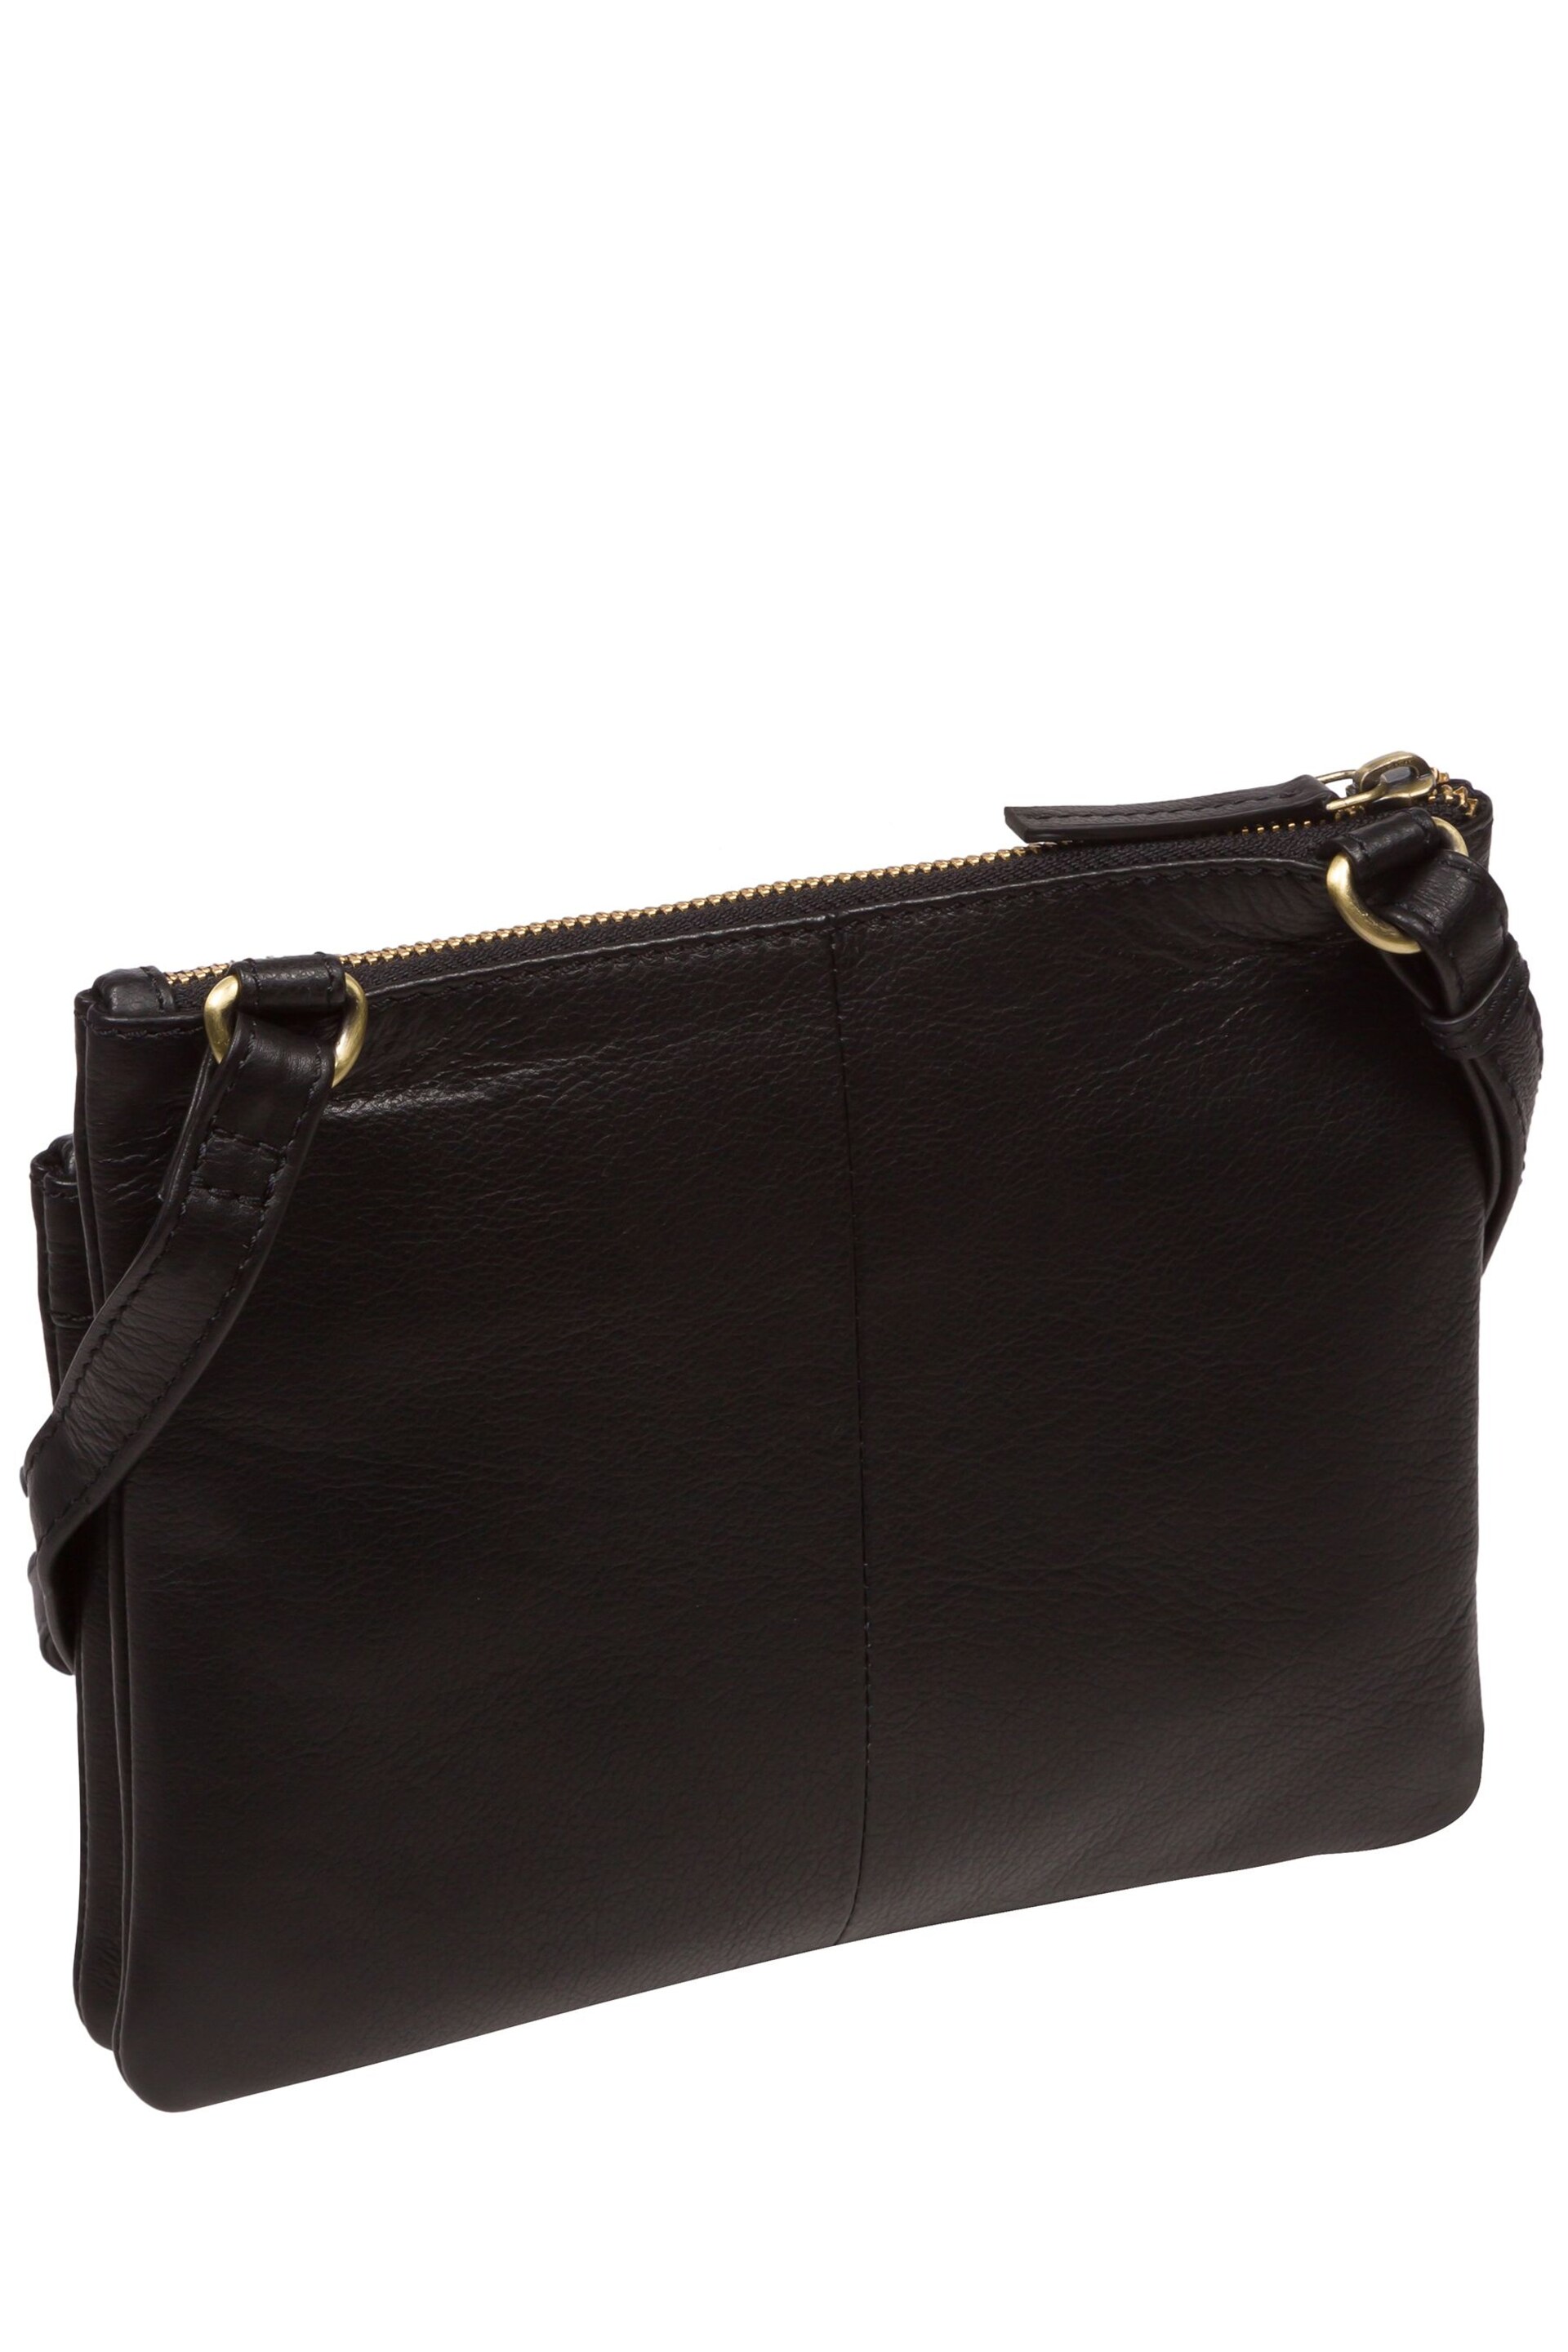 Cultured London Demi Leather Cross Body Bag - Image 2 of 5